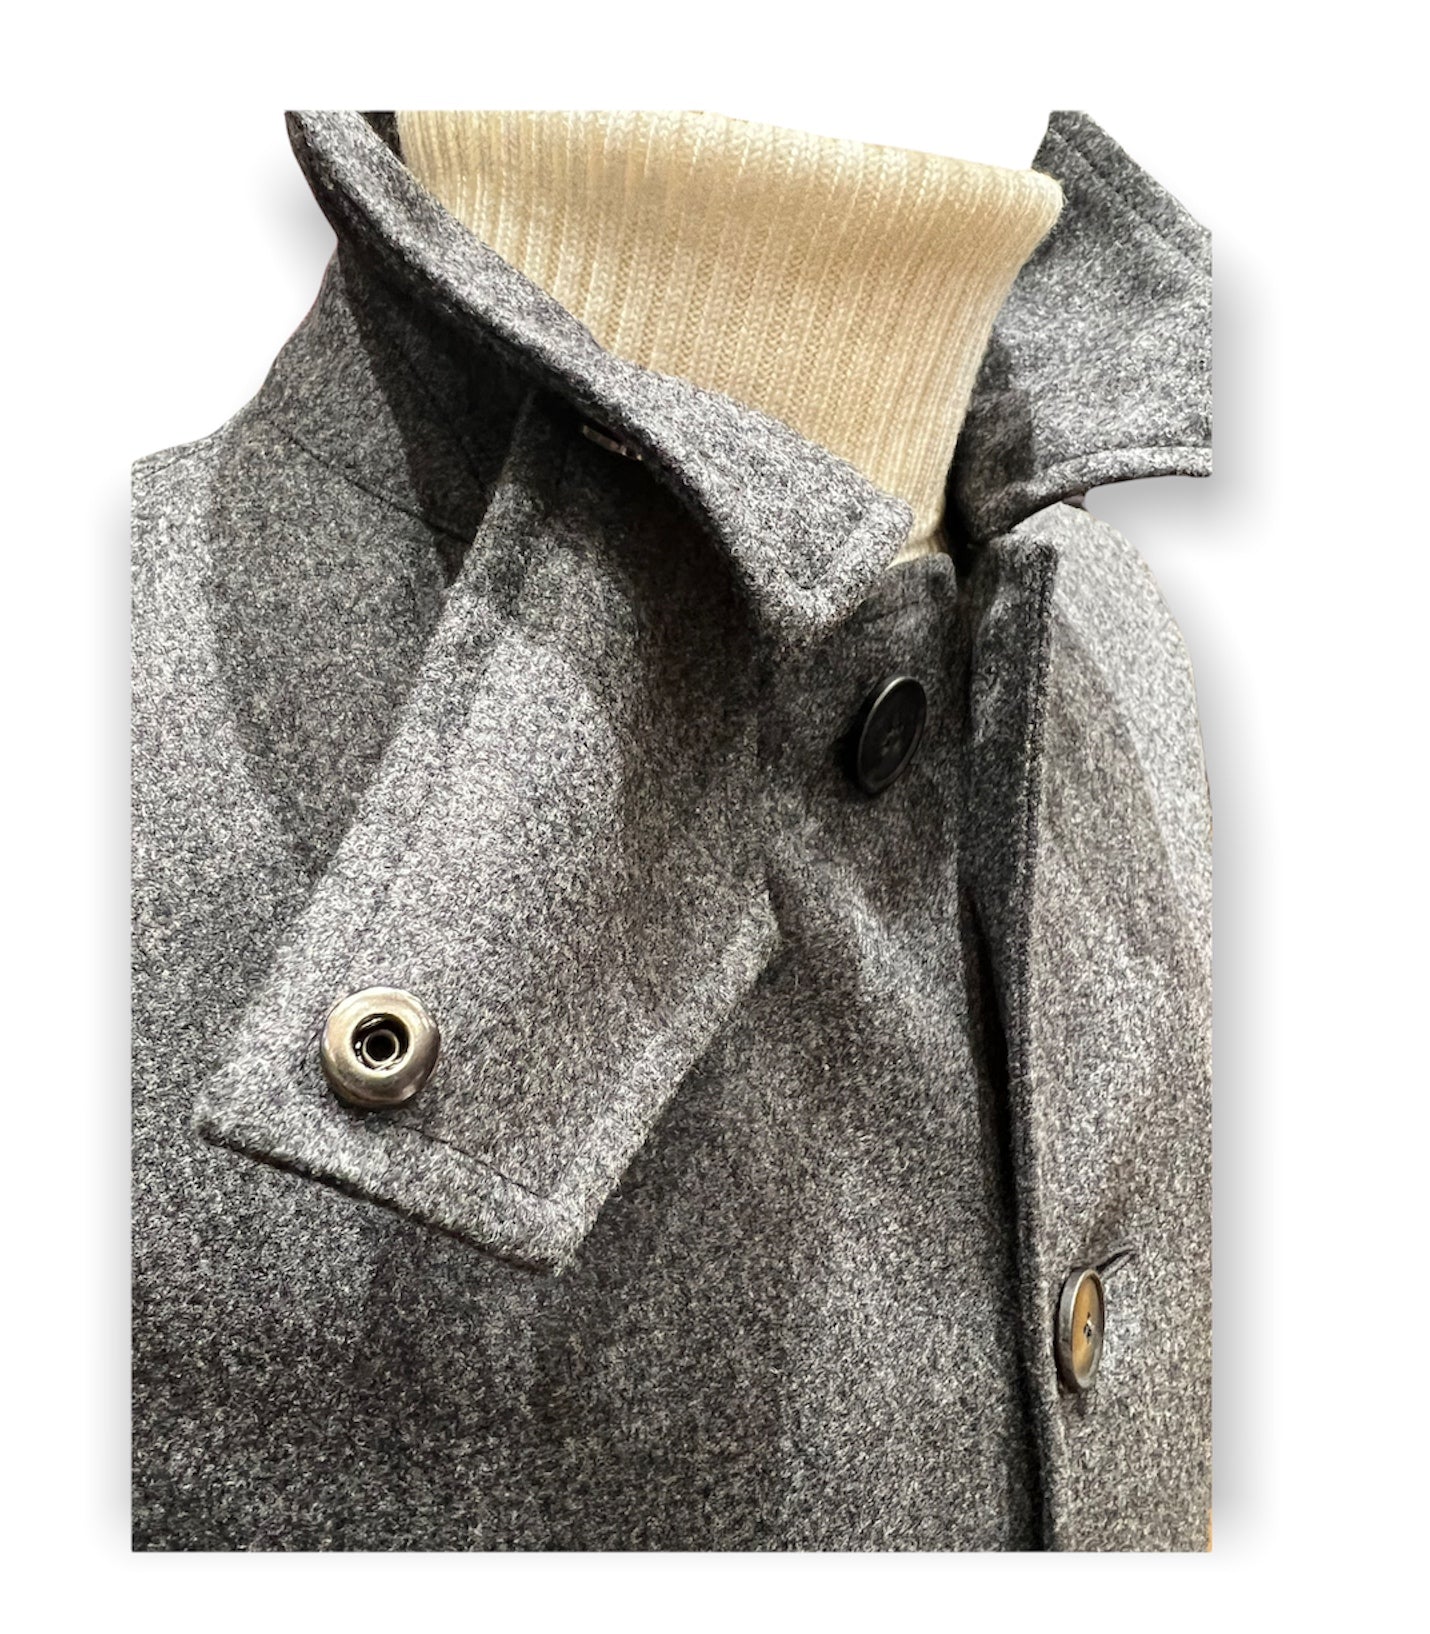 Overcoat in waterproof wool flannel - also made to measure in over 40 cloths